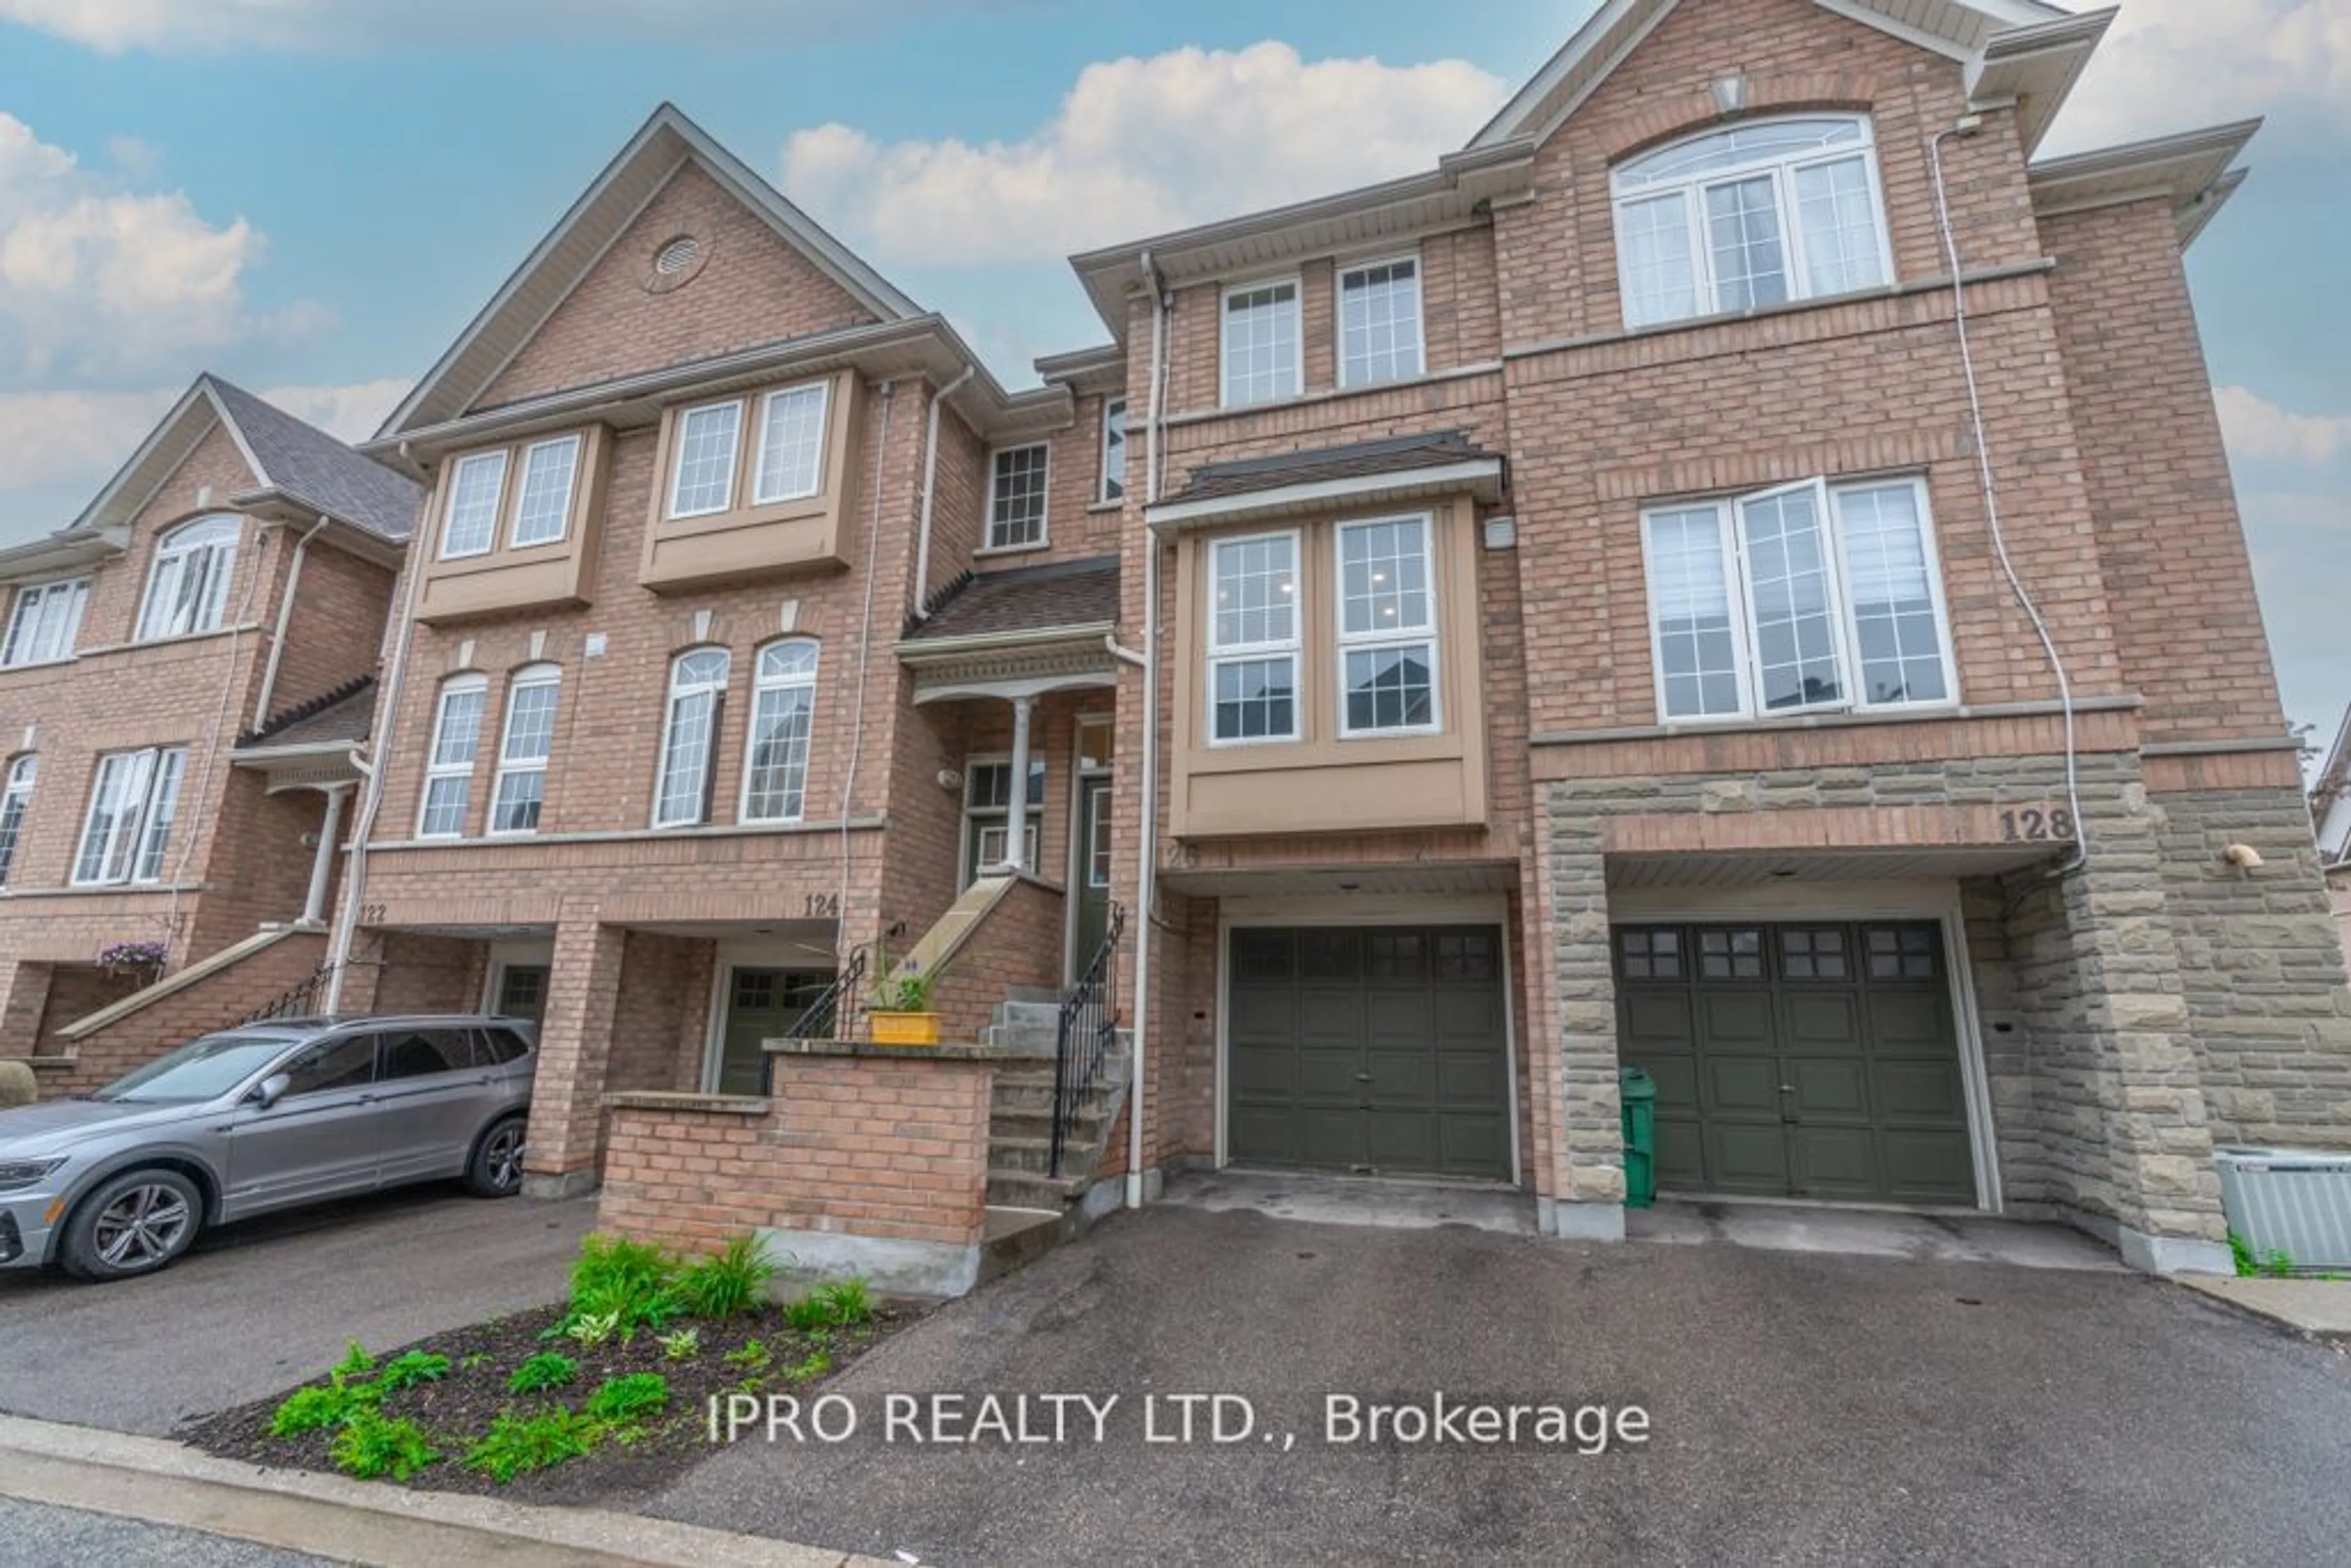 A pic from exterior of the house or condo for 50 Strathaven Dr #126, Mississauga Ontario L5R 4E7